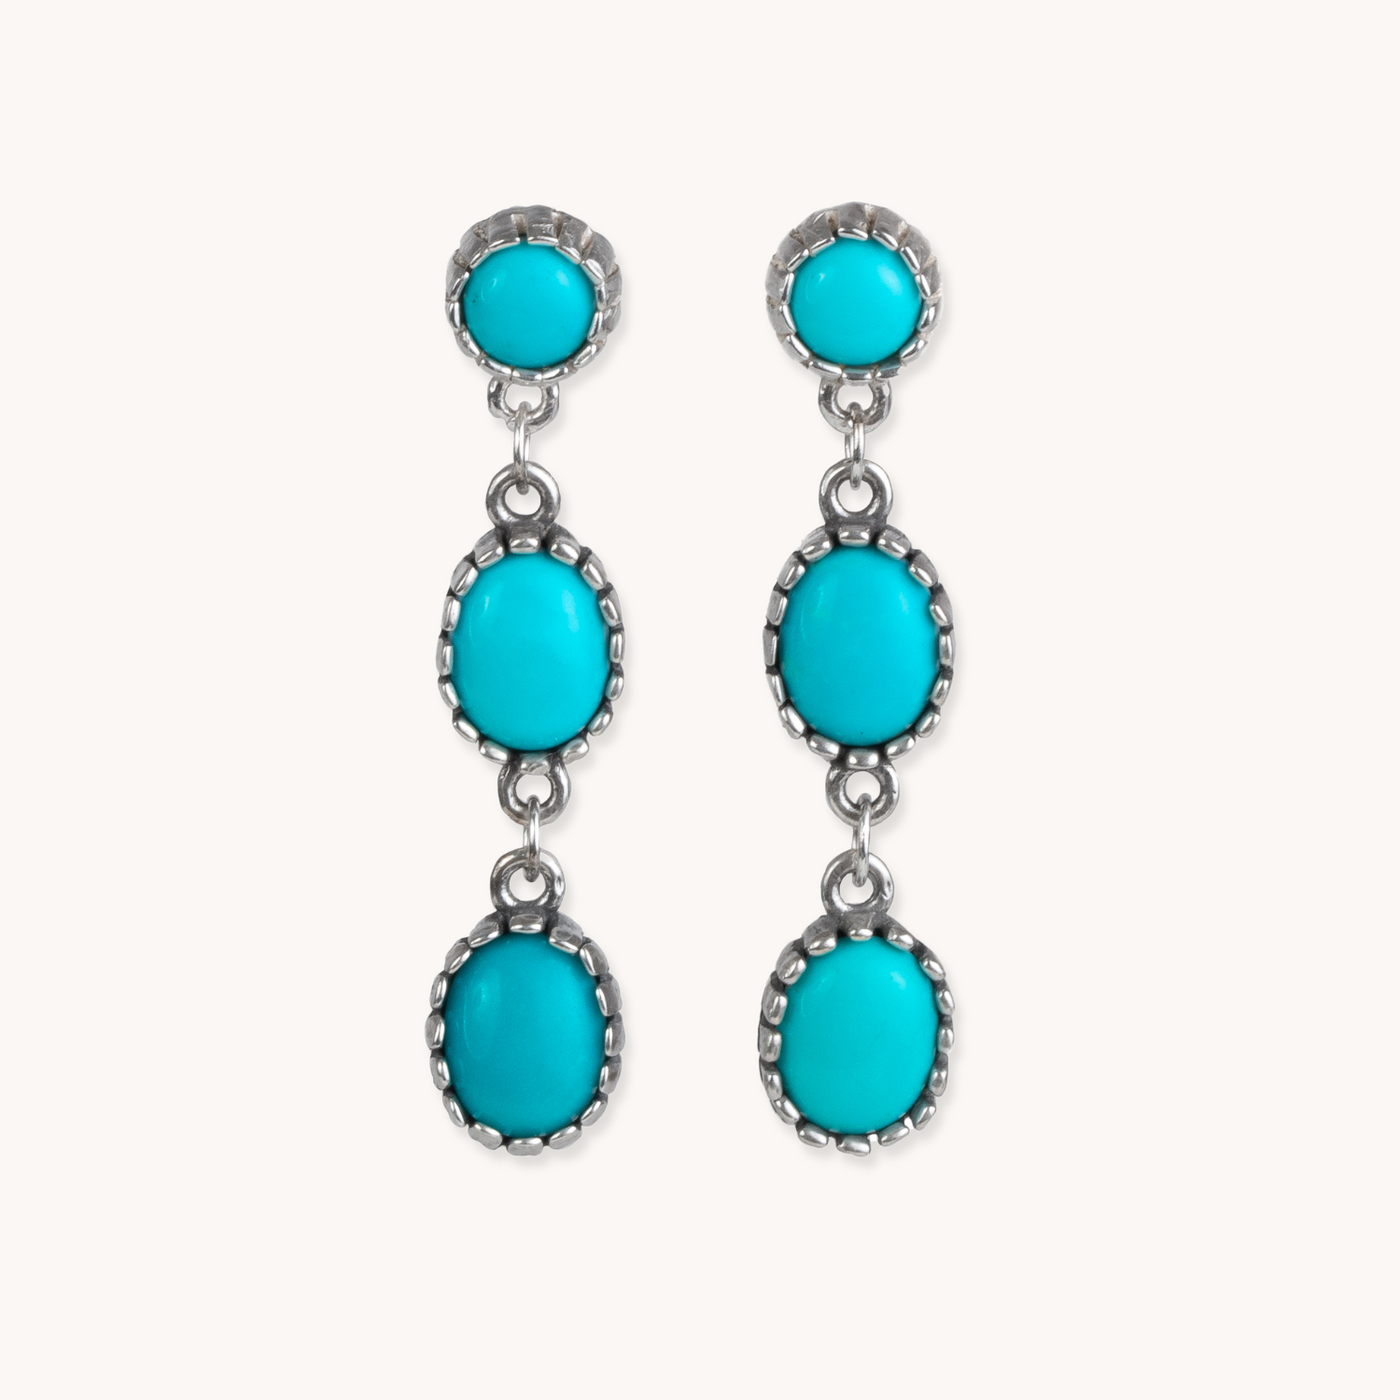 Handmade Silver and Turquoise Drop Earrings by TSkies